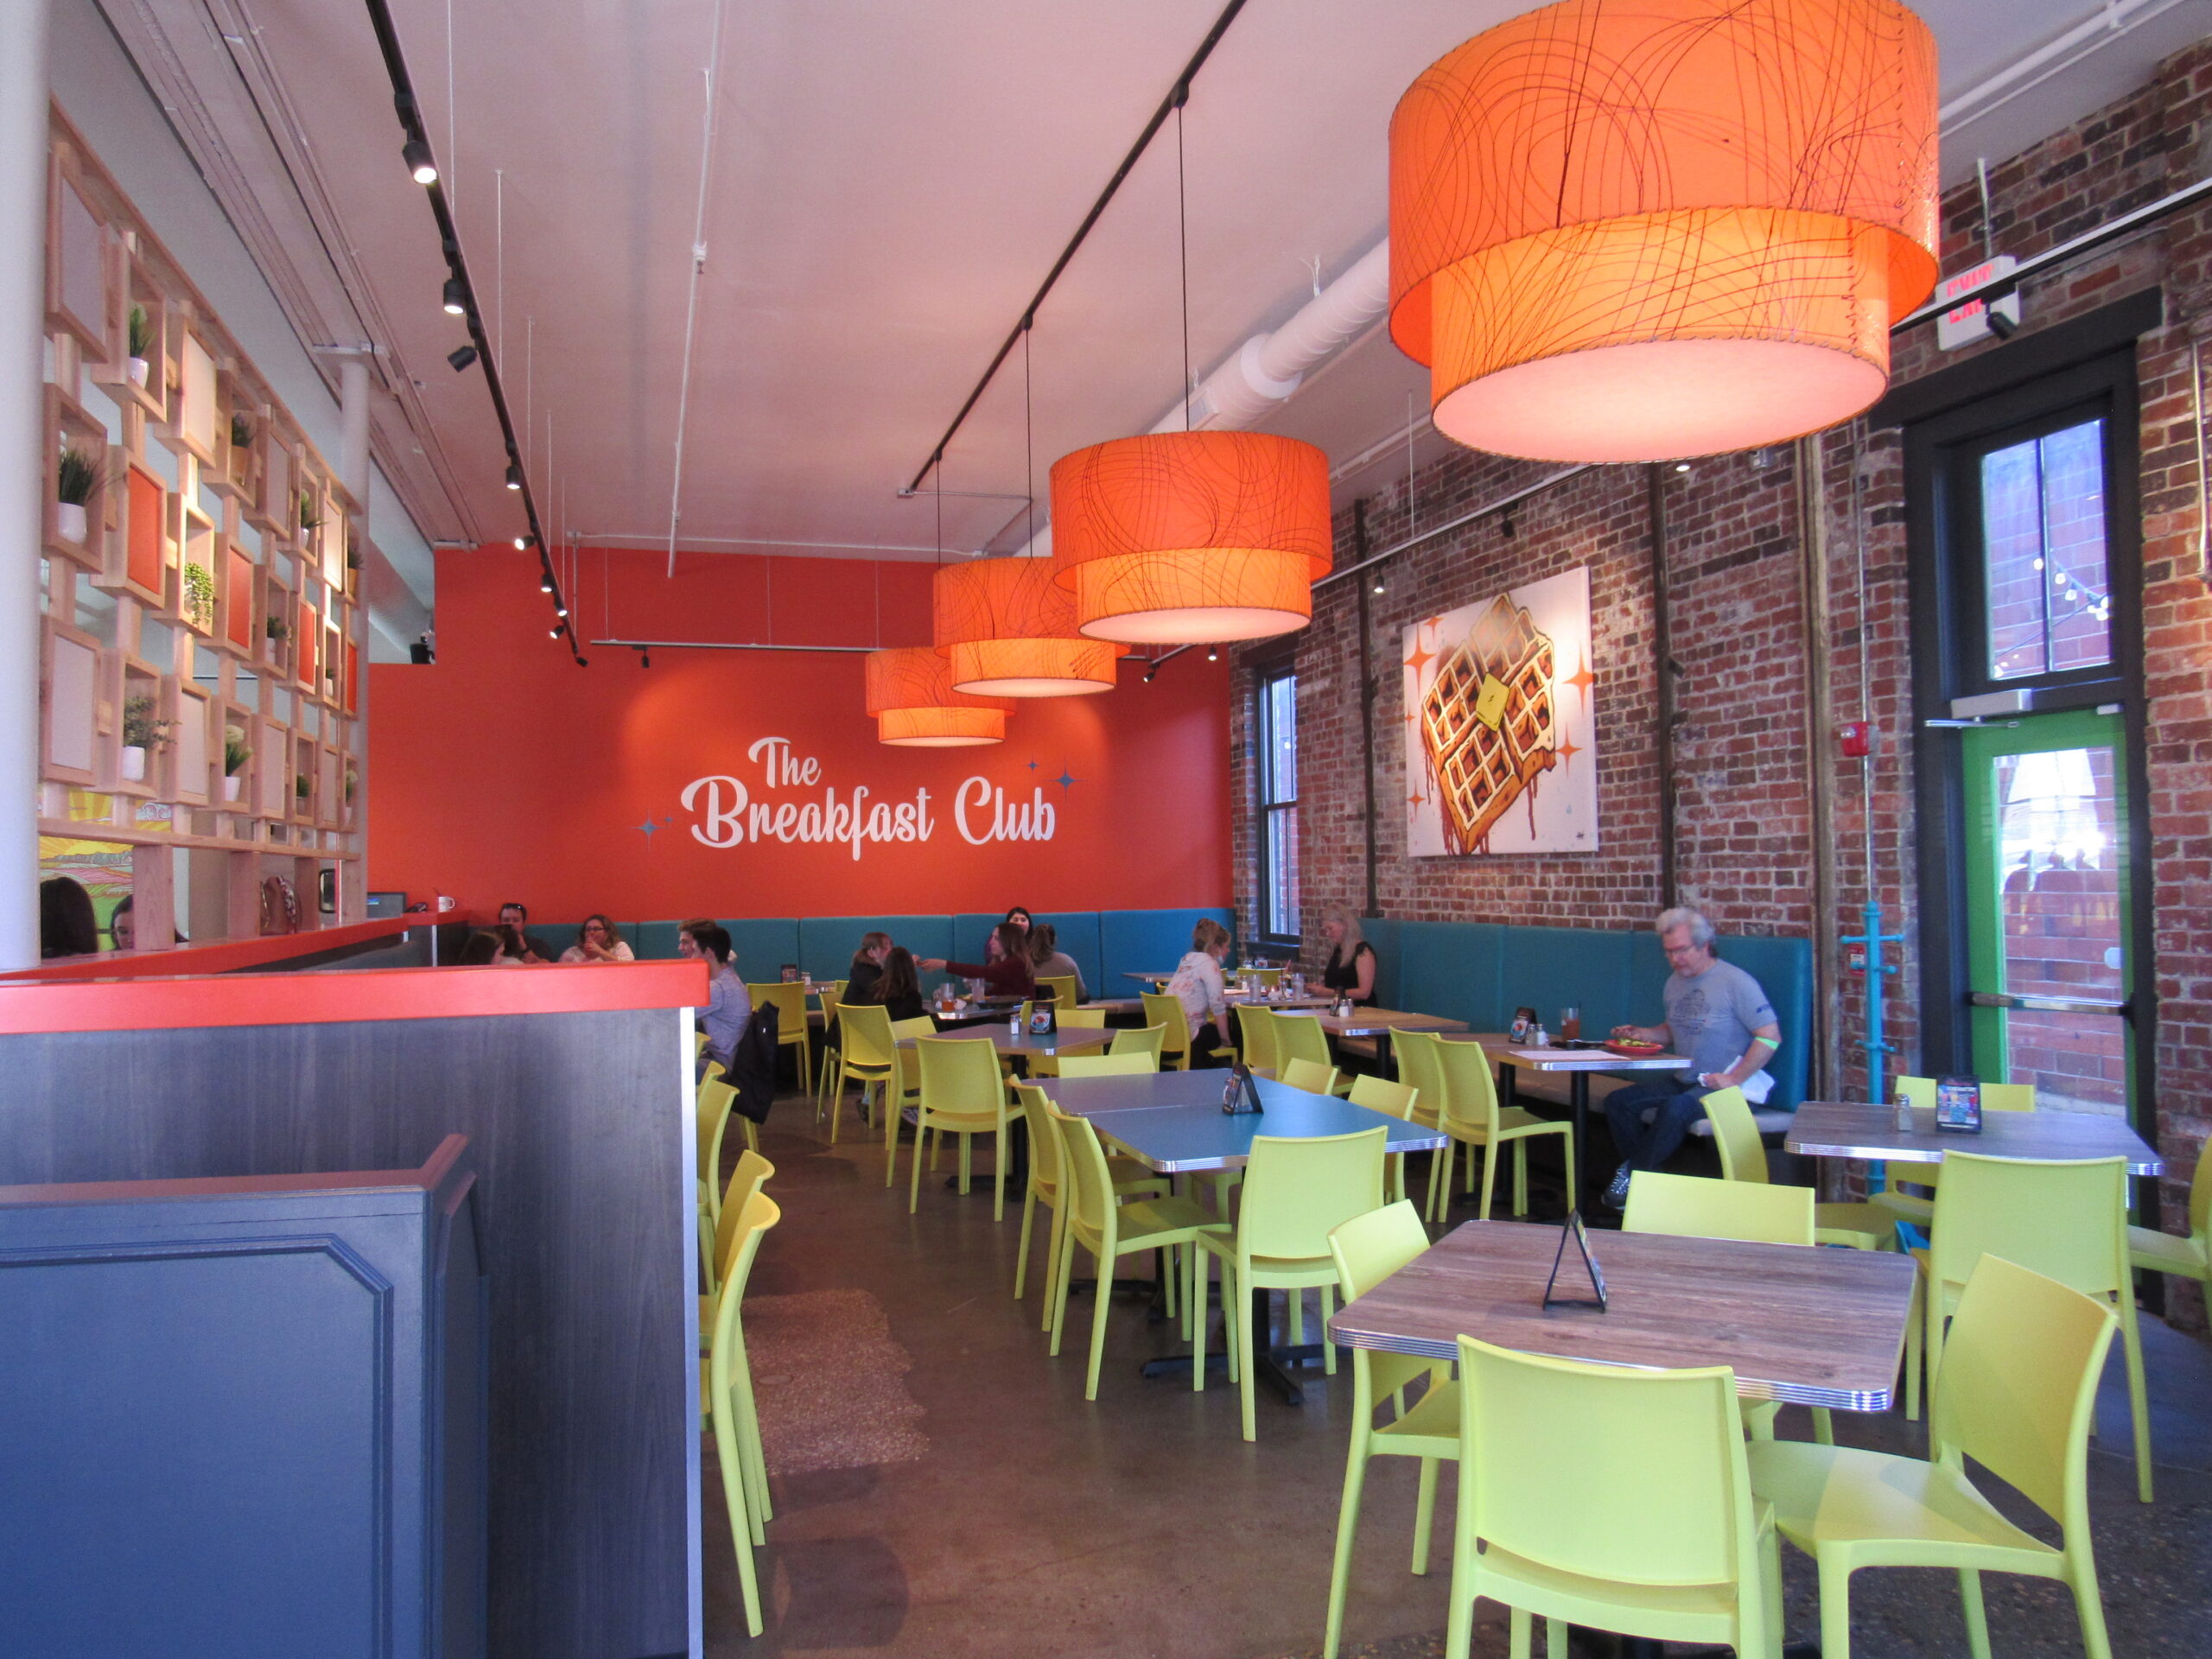 front view of dining room, orange back wall with “The Breakfast Club” written, customers eating at tables.